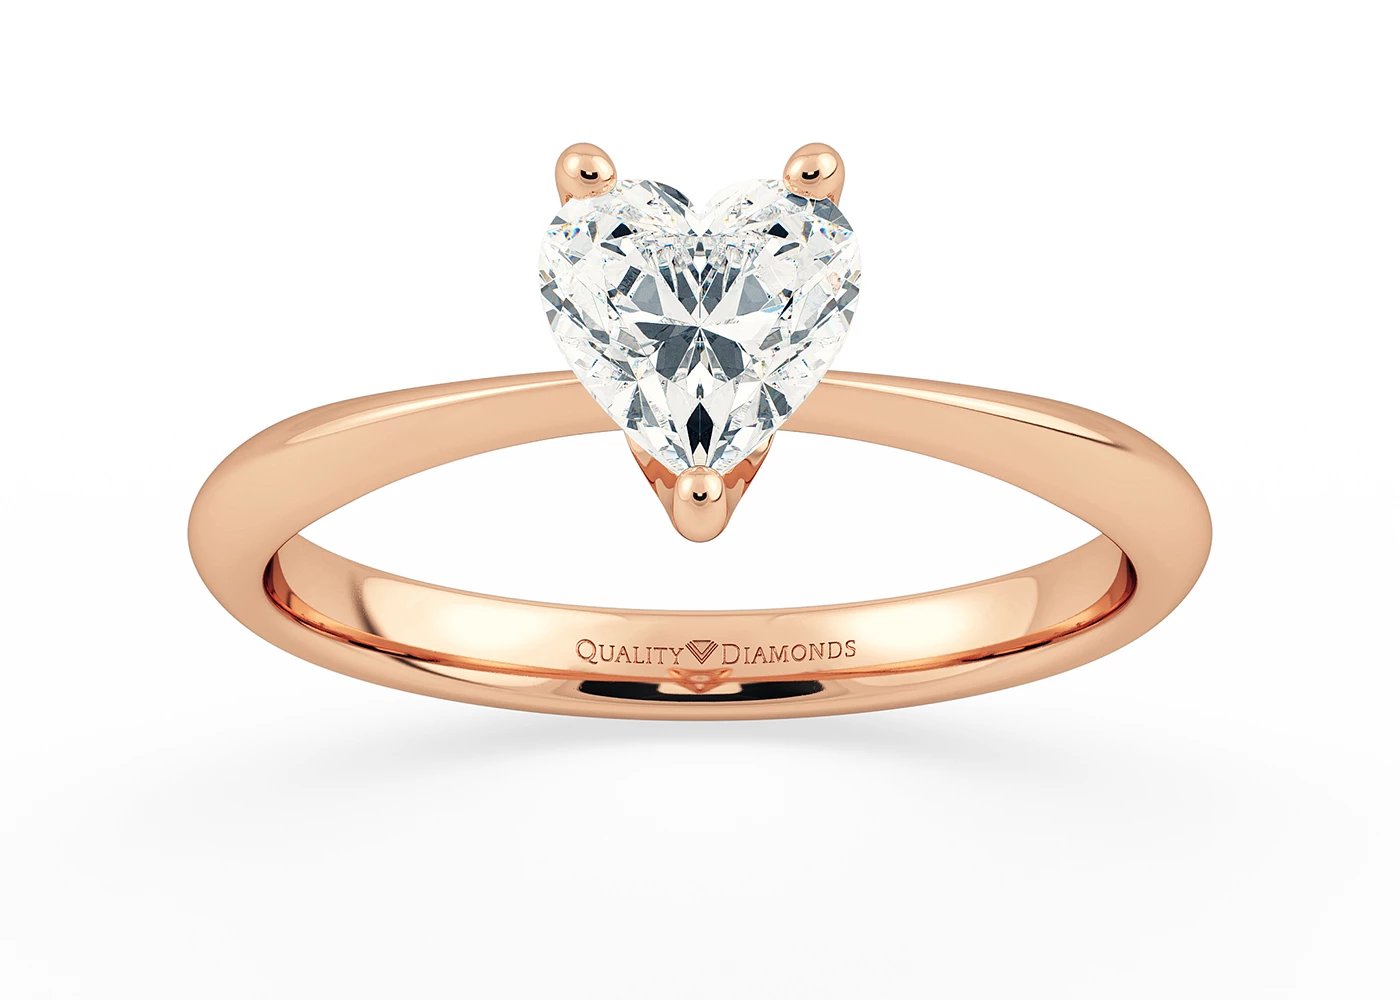 One Carat Heart Solitaire Diamond Engagement Ring in 18K Rose Gold